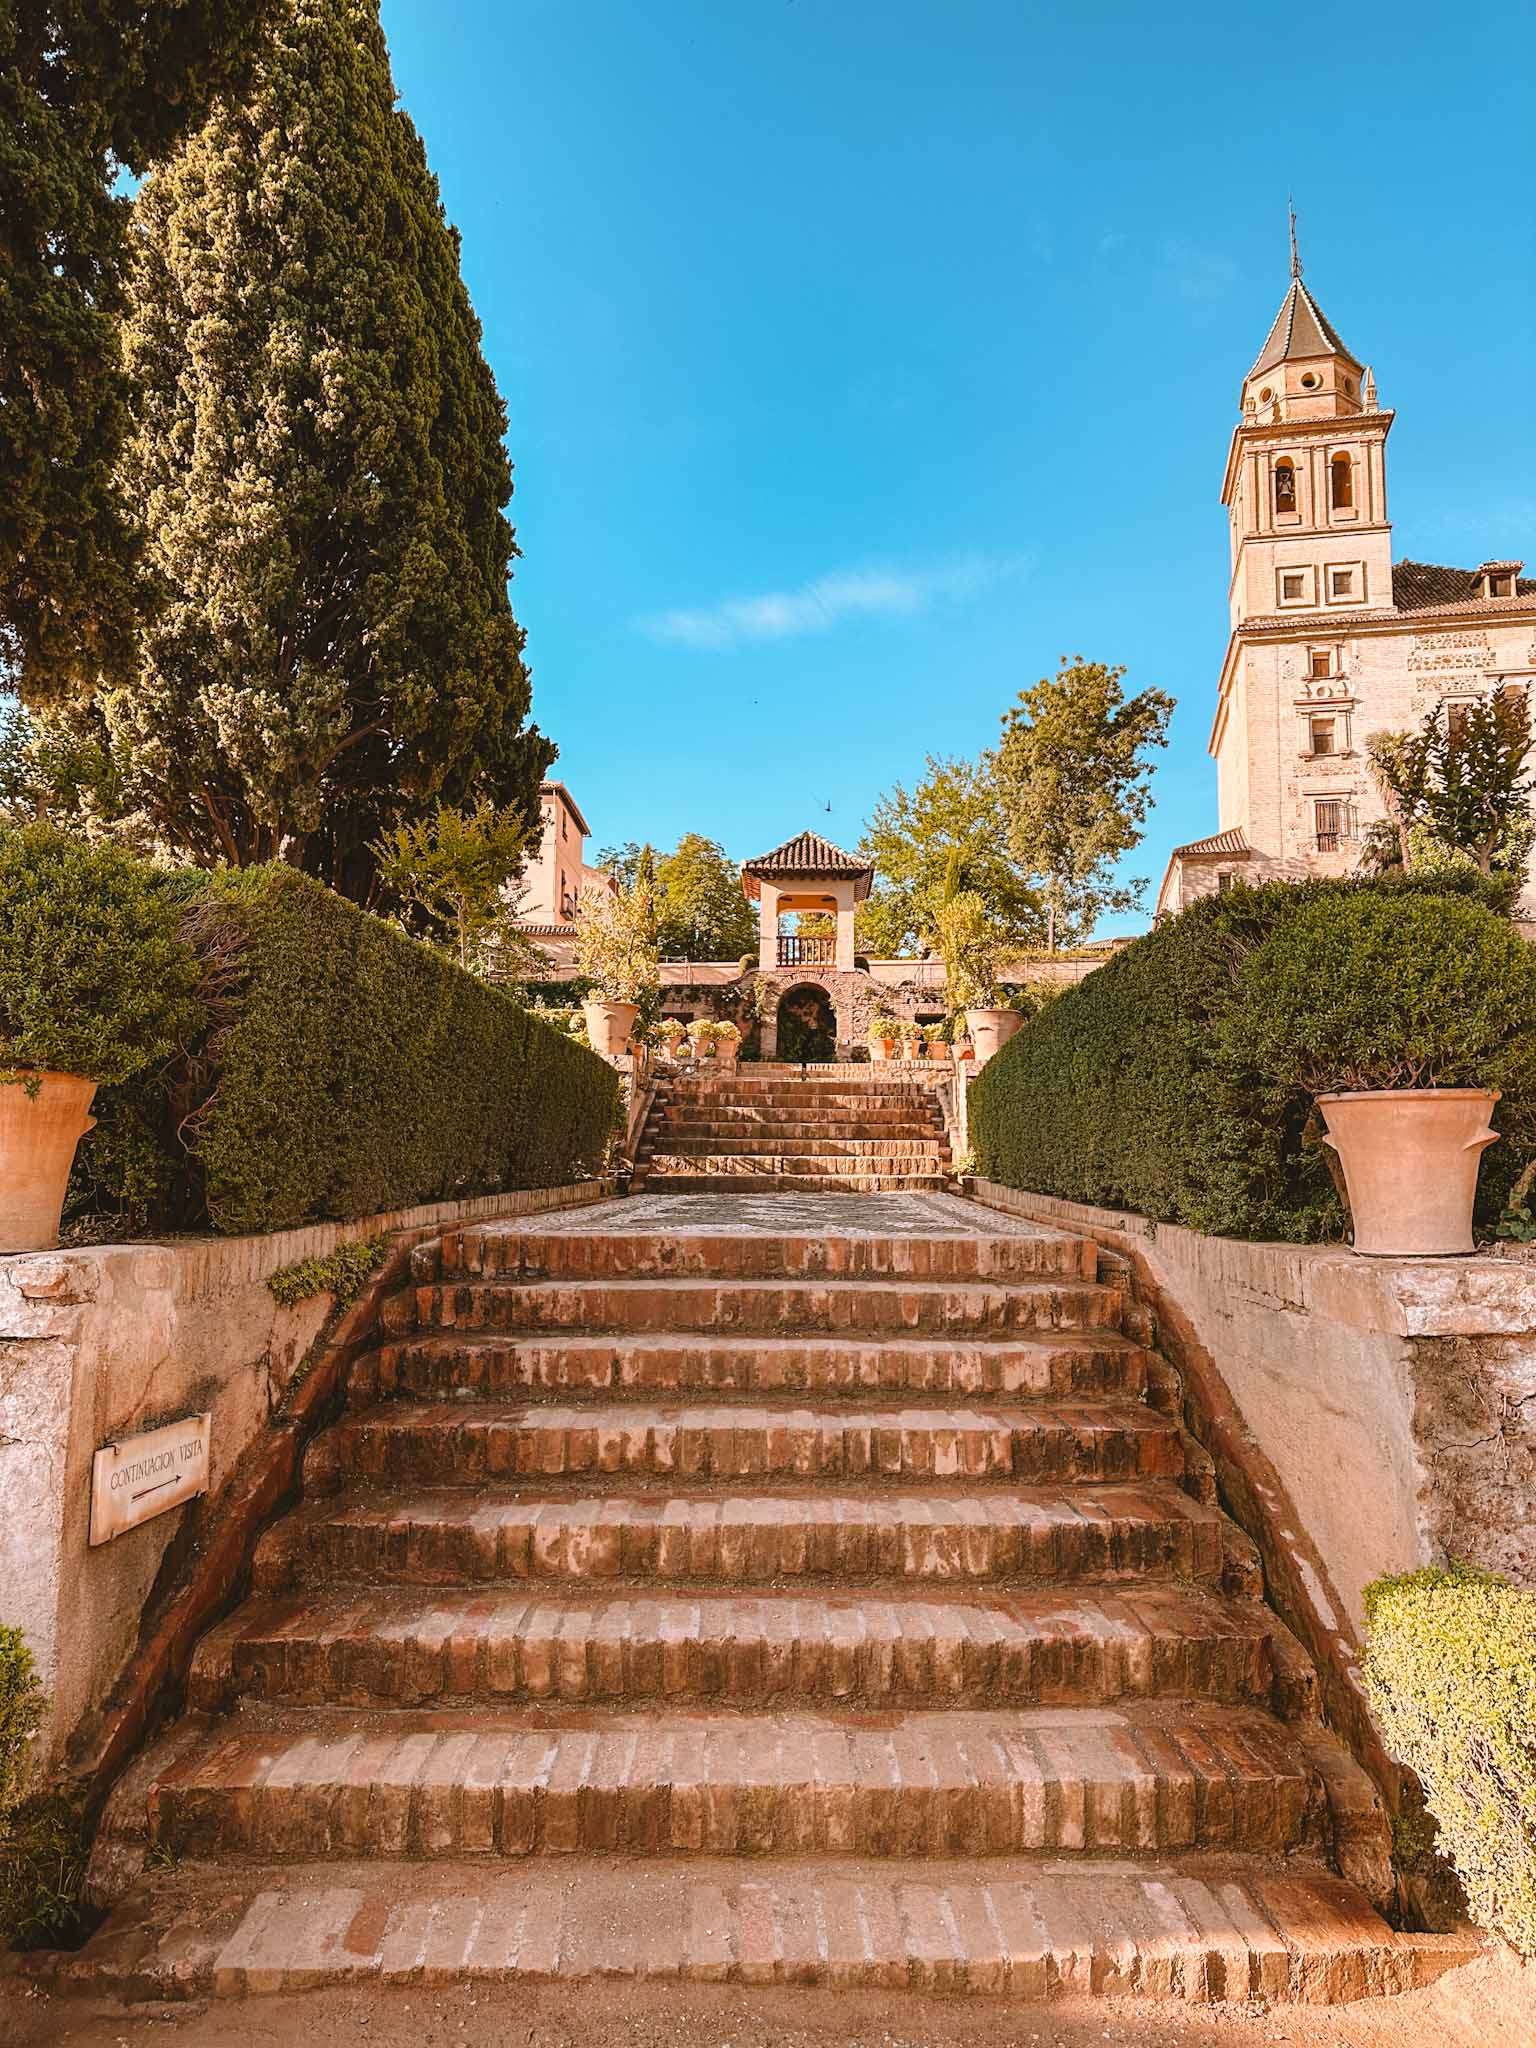 Granada, Spain best things to do in the city at the foothills of the Sierra Nevada mountains